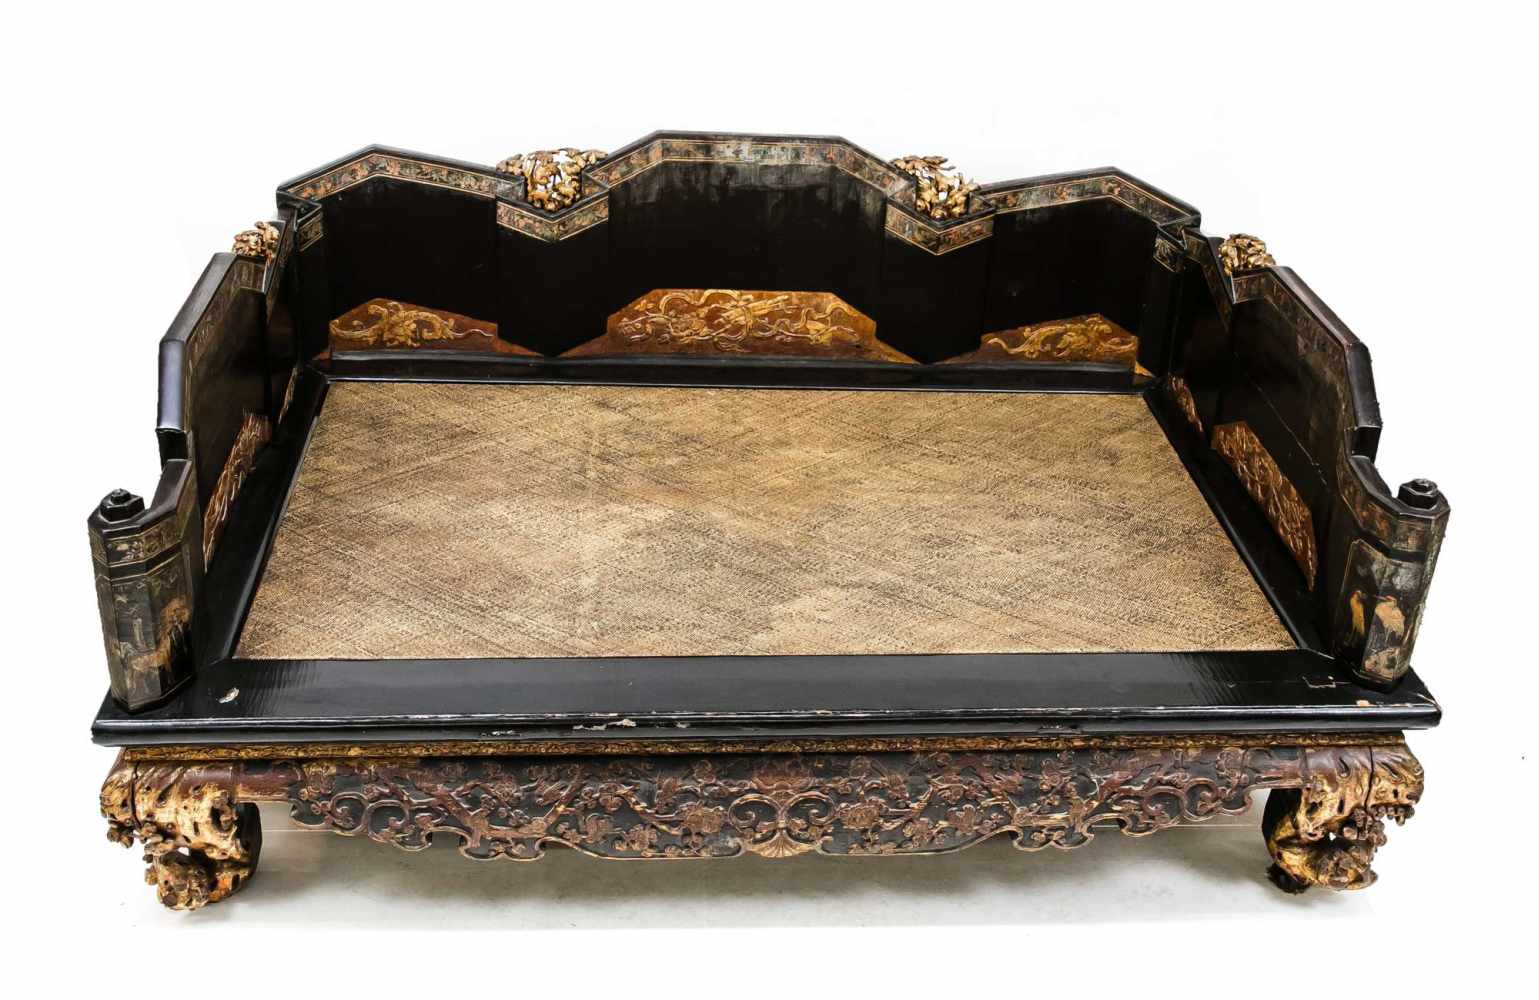 Kang Bed, China, 19th C. Hardwood body covered with black Chinese lacquer. Three-sided